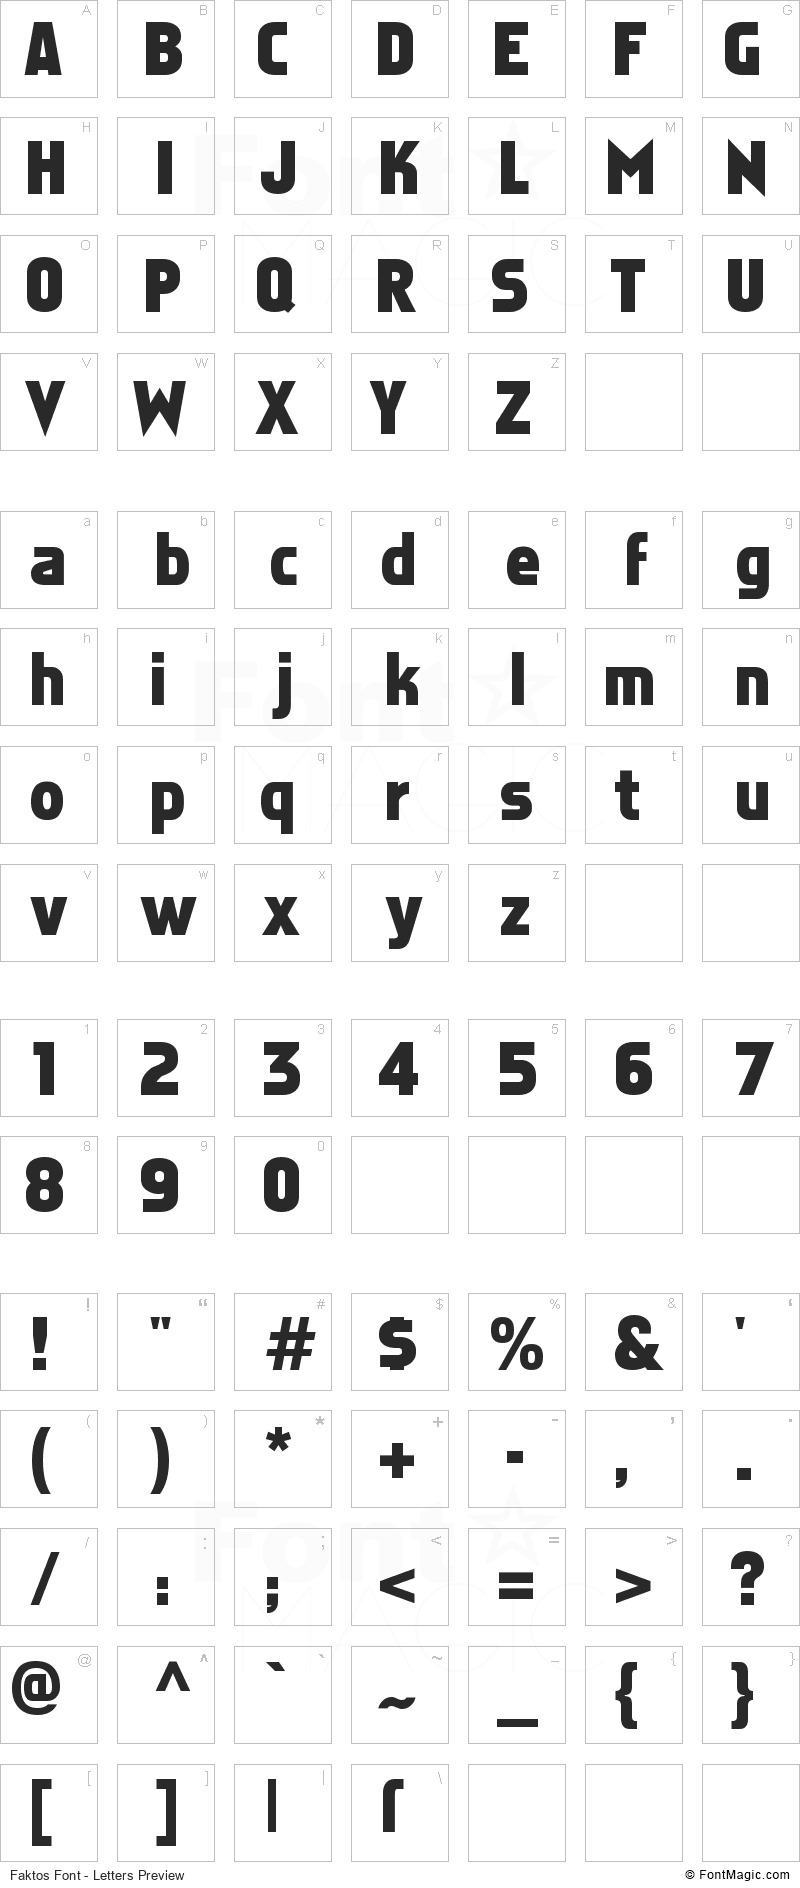 Faktos Font - All Latters Preview Chart